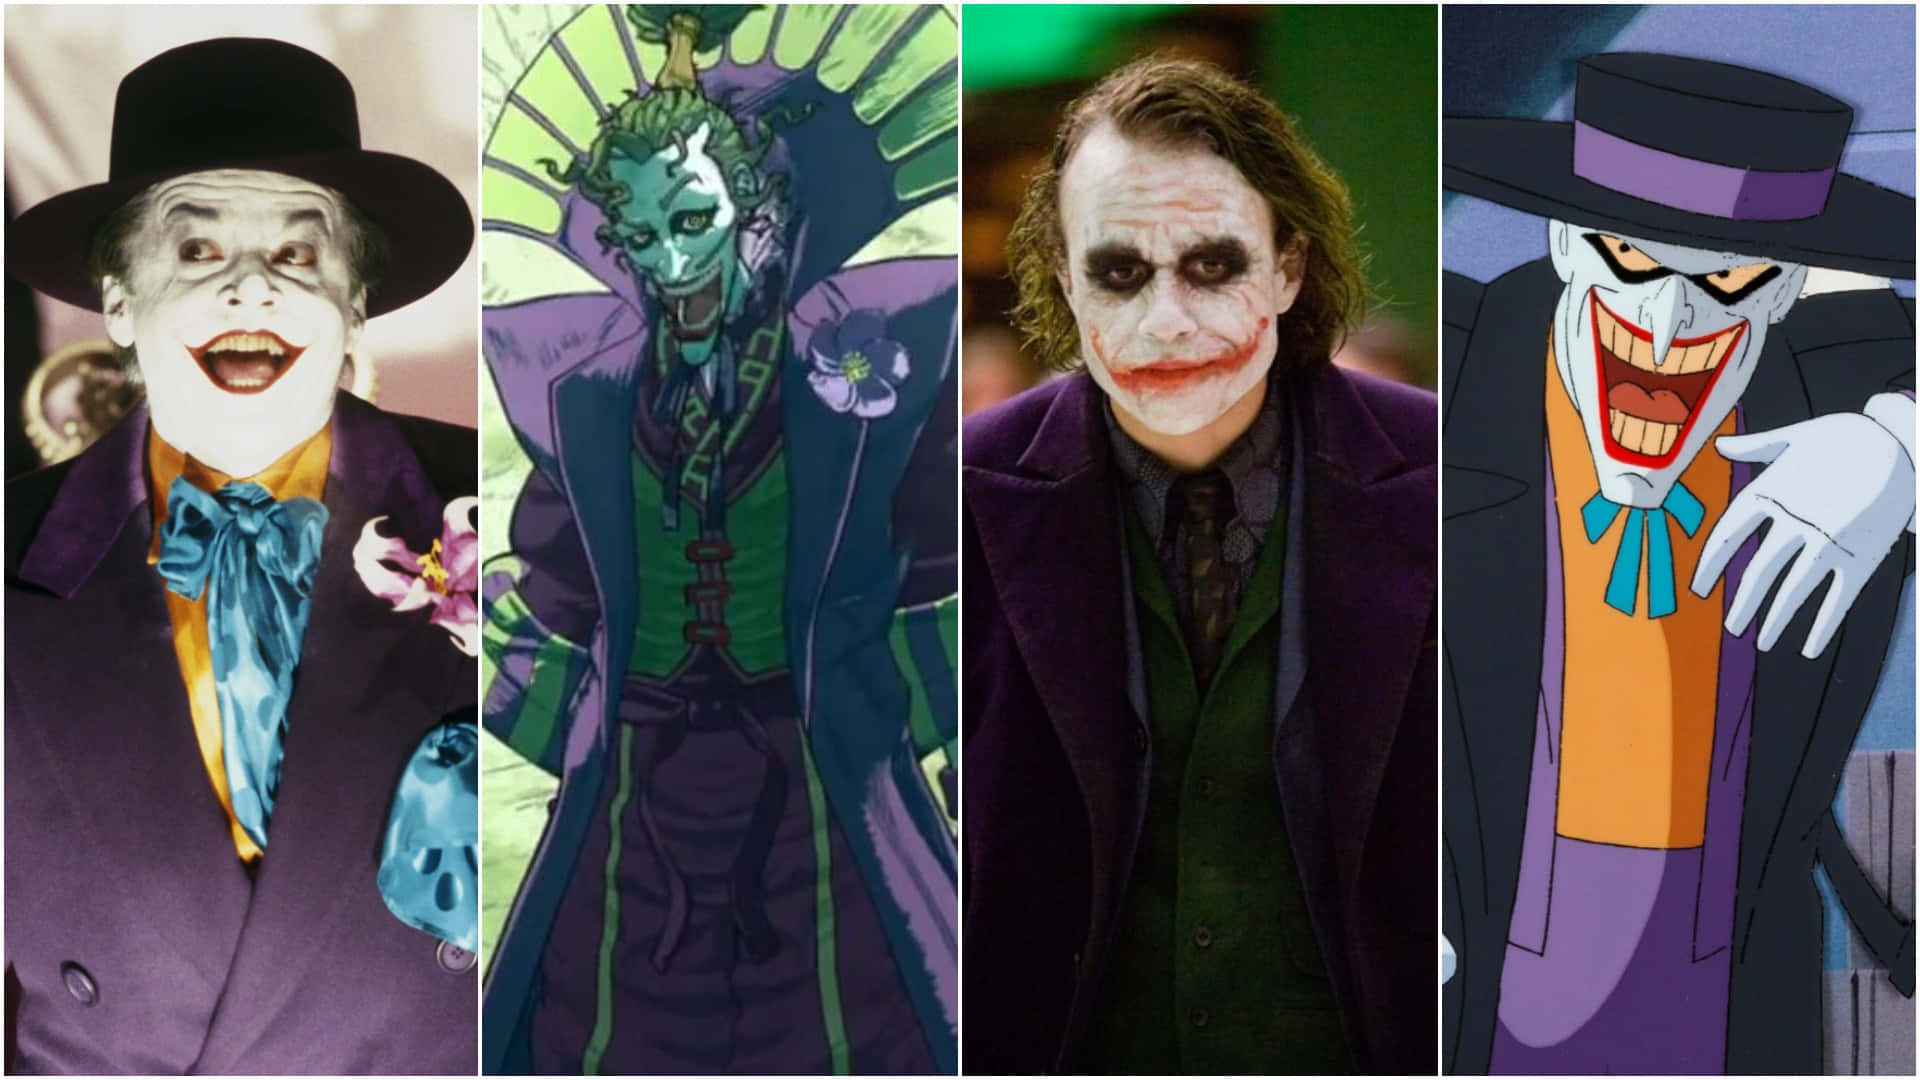 "Why so serious?" - The Joker